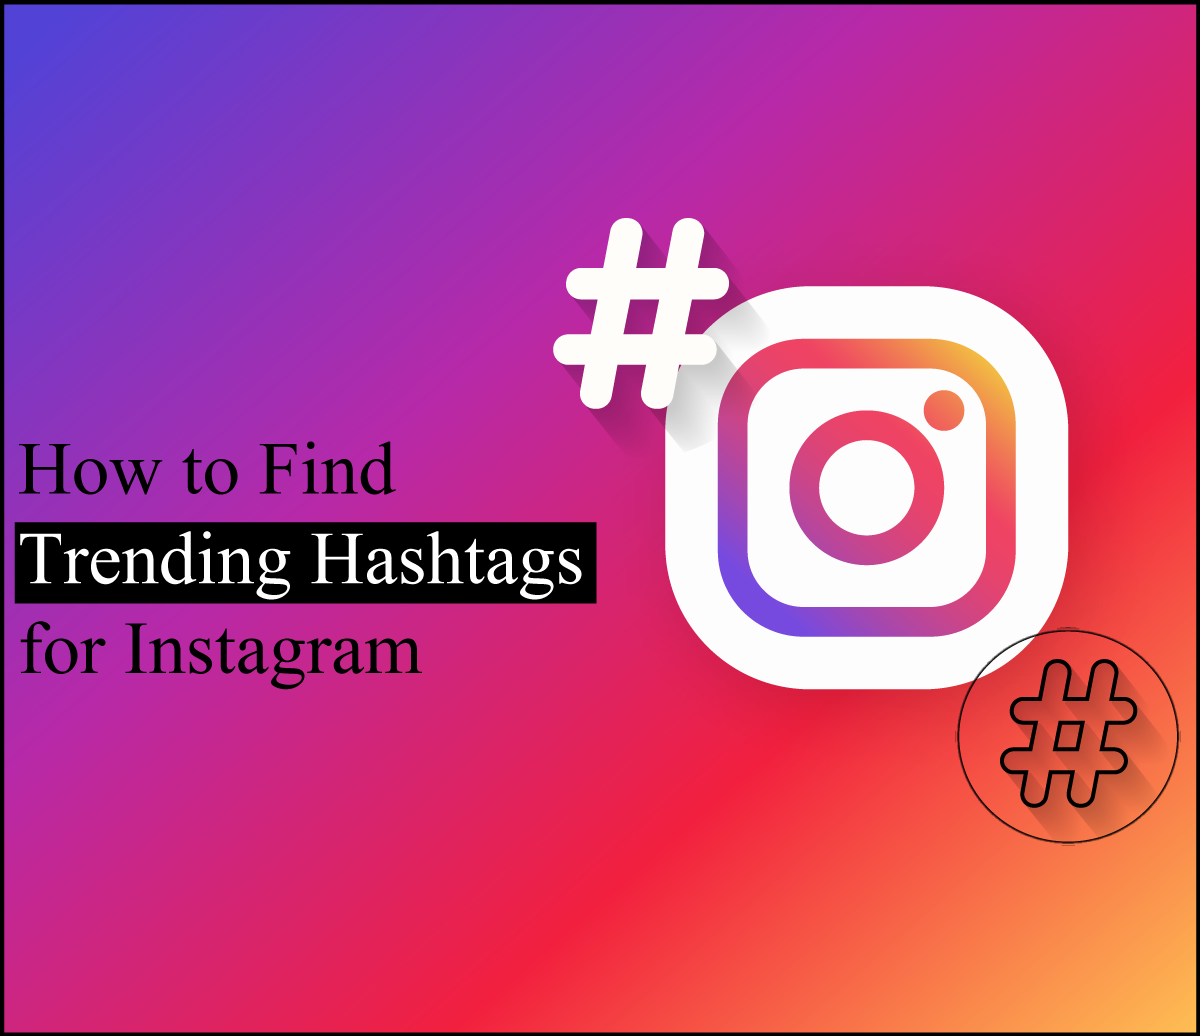 How to Find Trending Hashtags for Instagram